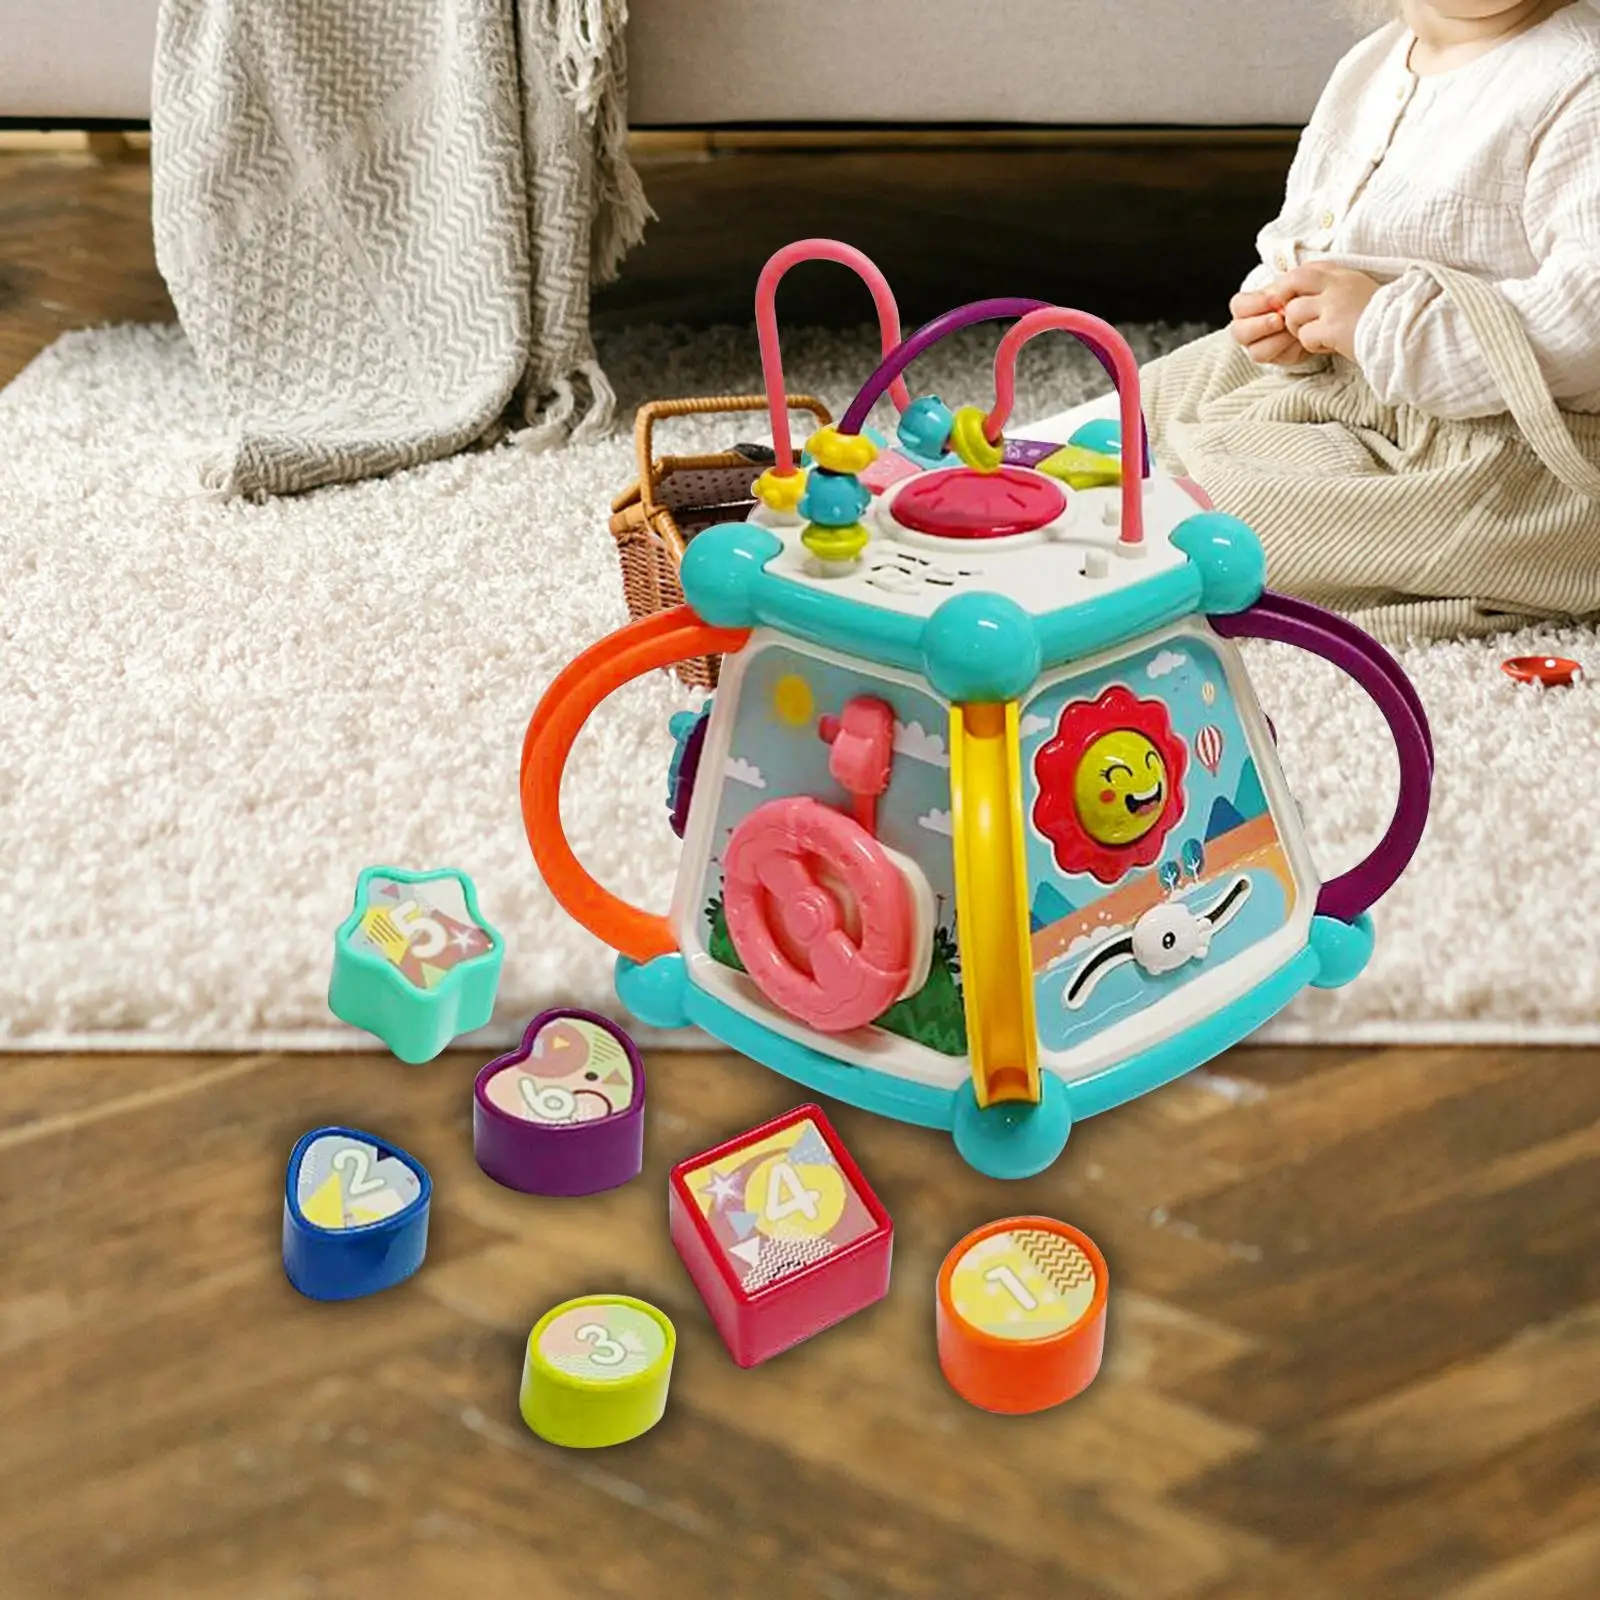 Baby Musical Toys Early Development with Lights Montessori Educational Toys Activity Cube Toy for Toddlers Boys Girls Kids Gift